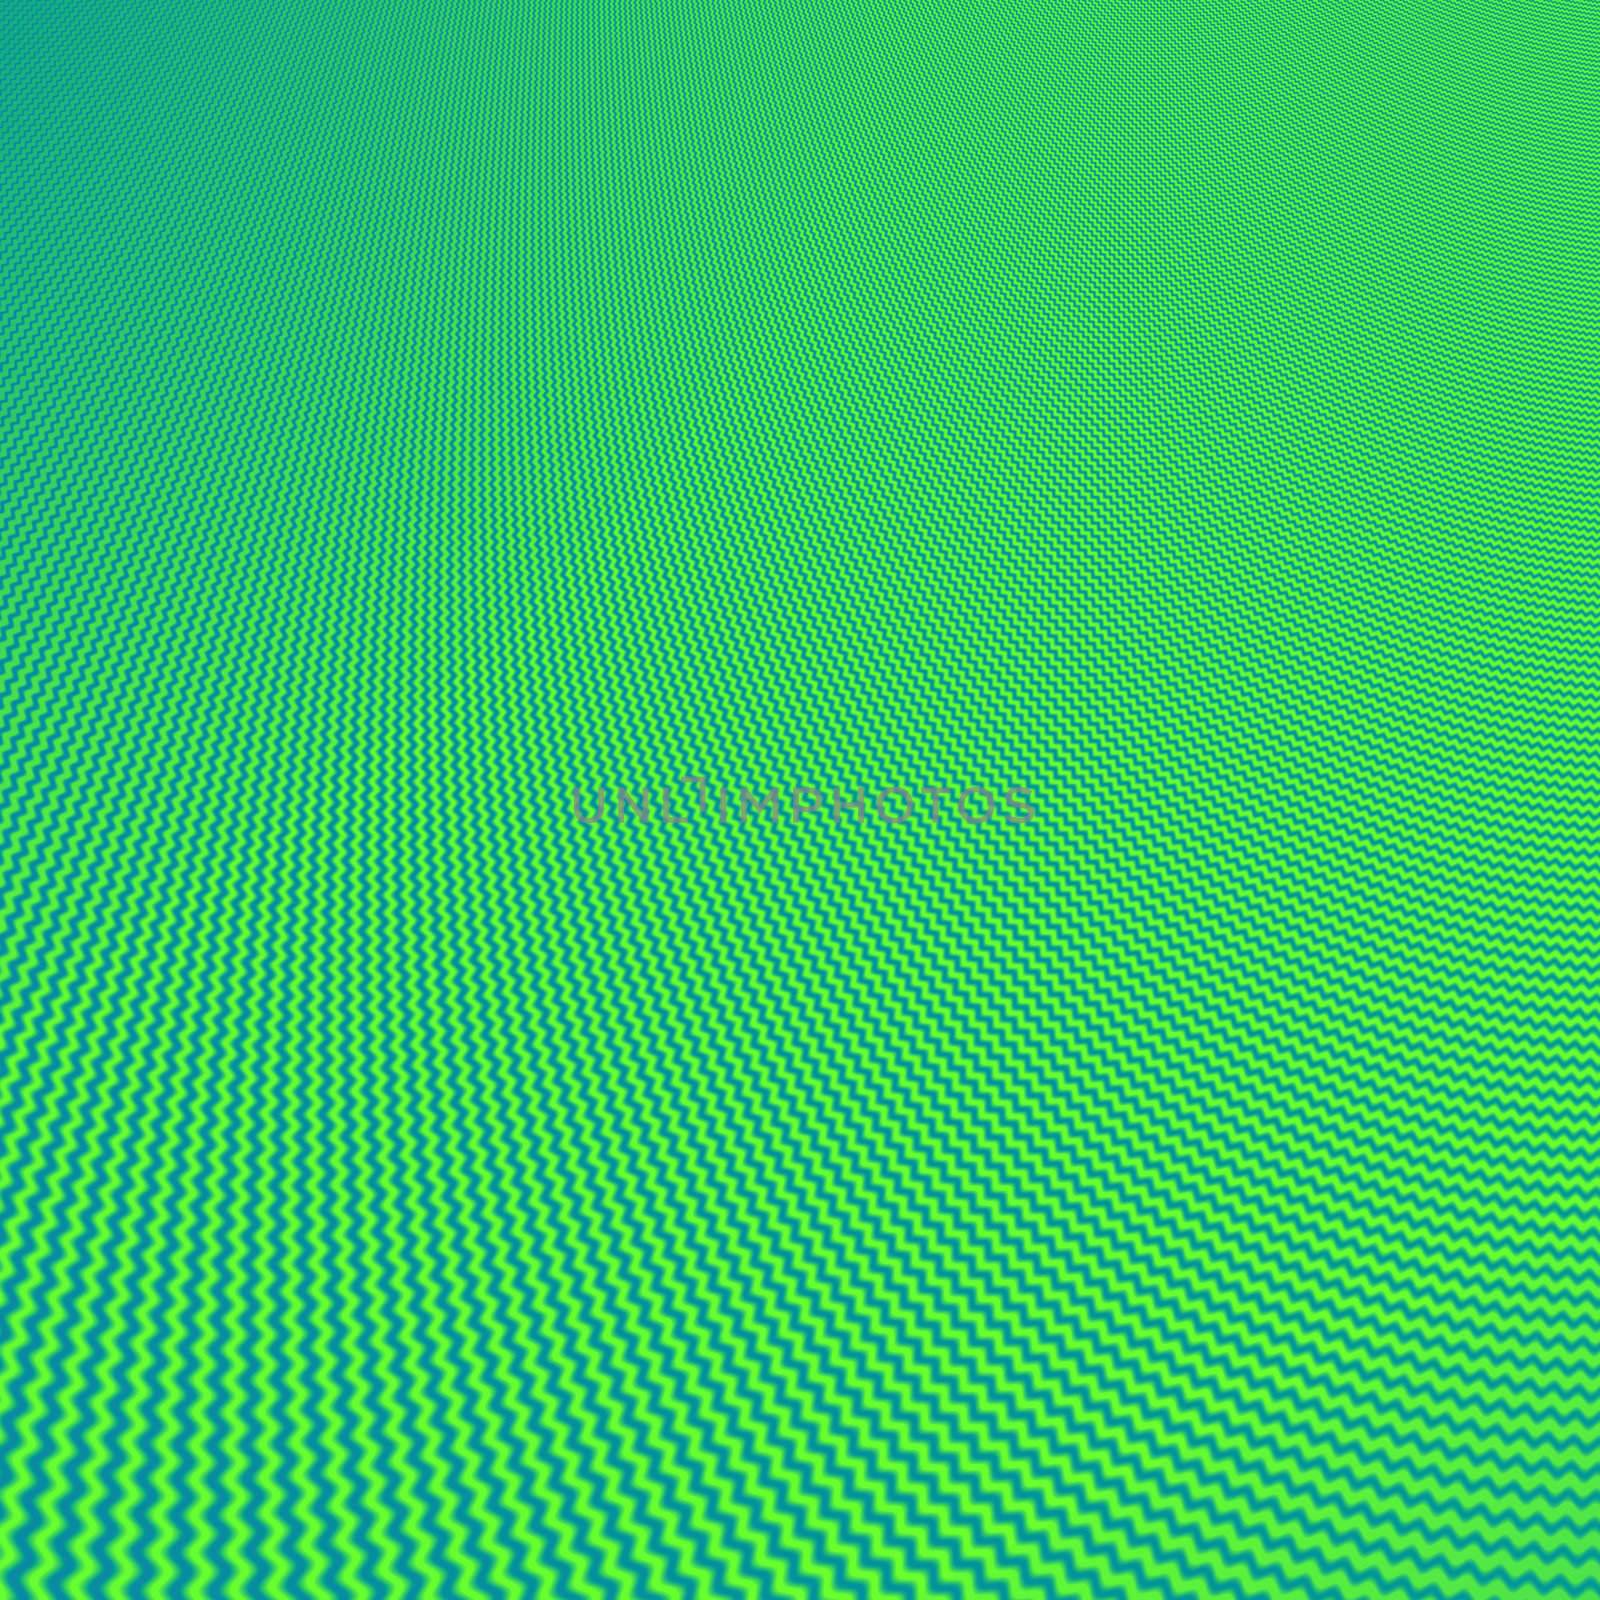 Abstract green and azure fractal background, zigzag stripes theme. Thumbnail may contain moire not existing on fullsize picture.